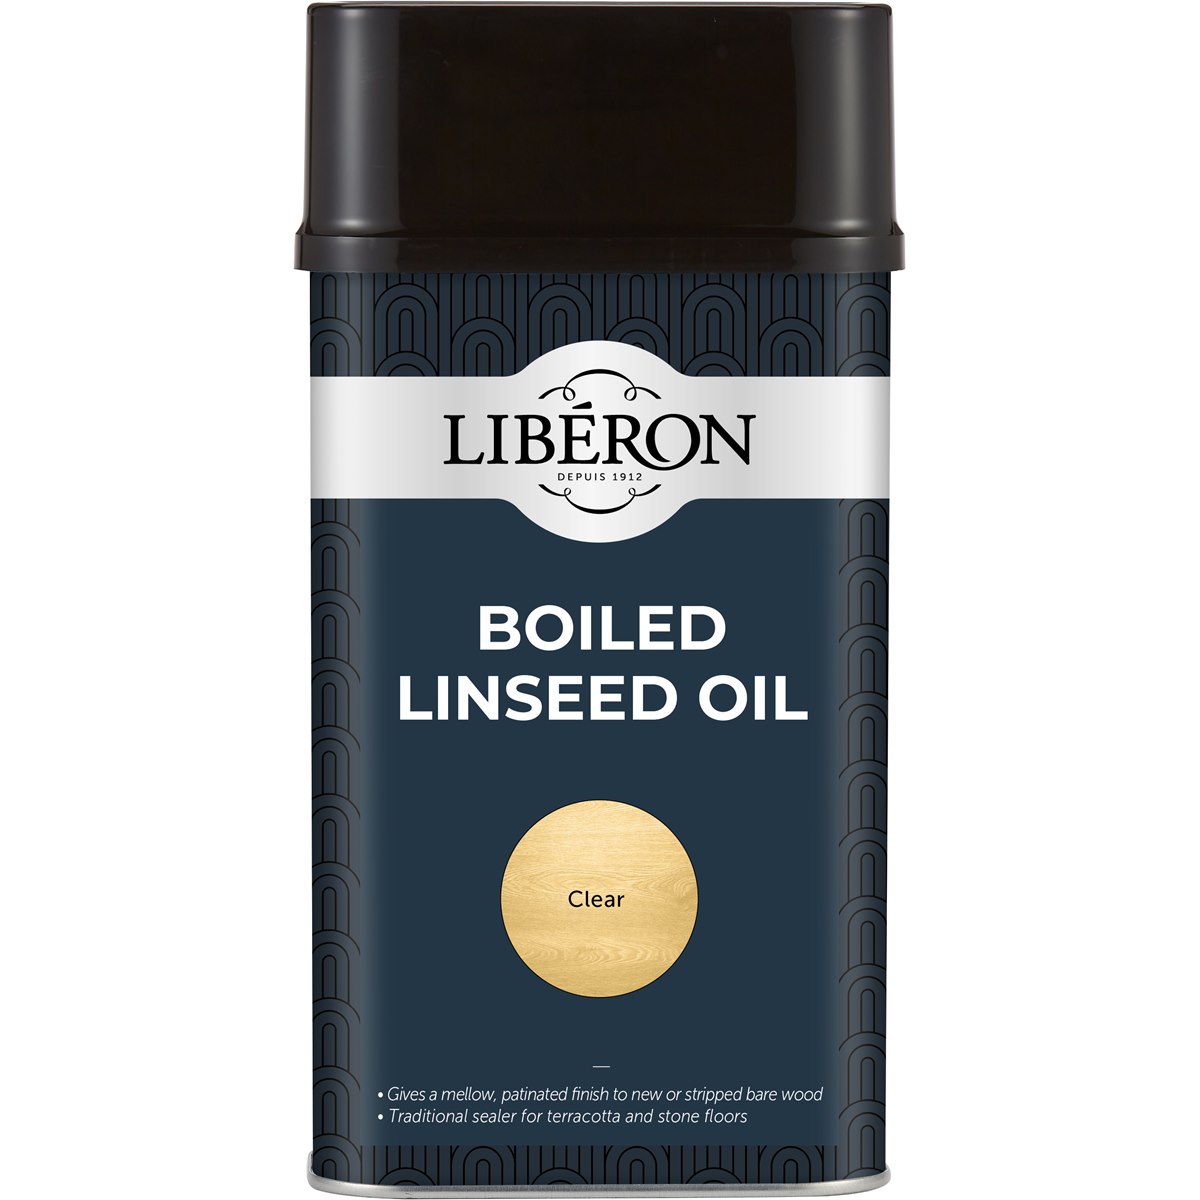 Liberon Boiled Linseed Oil 1 Litre